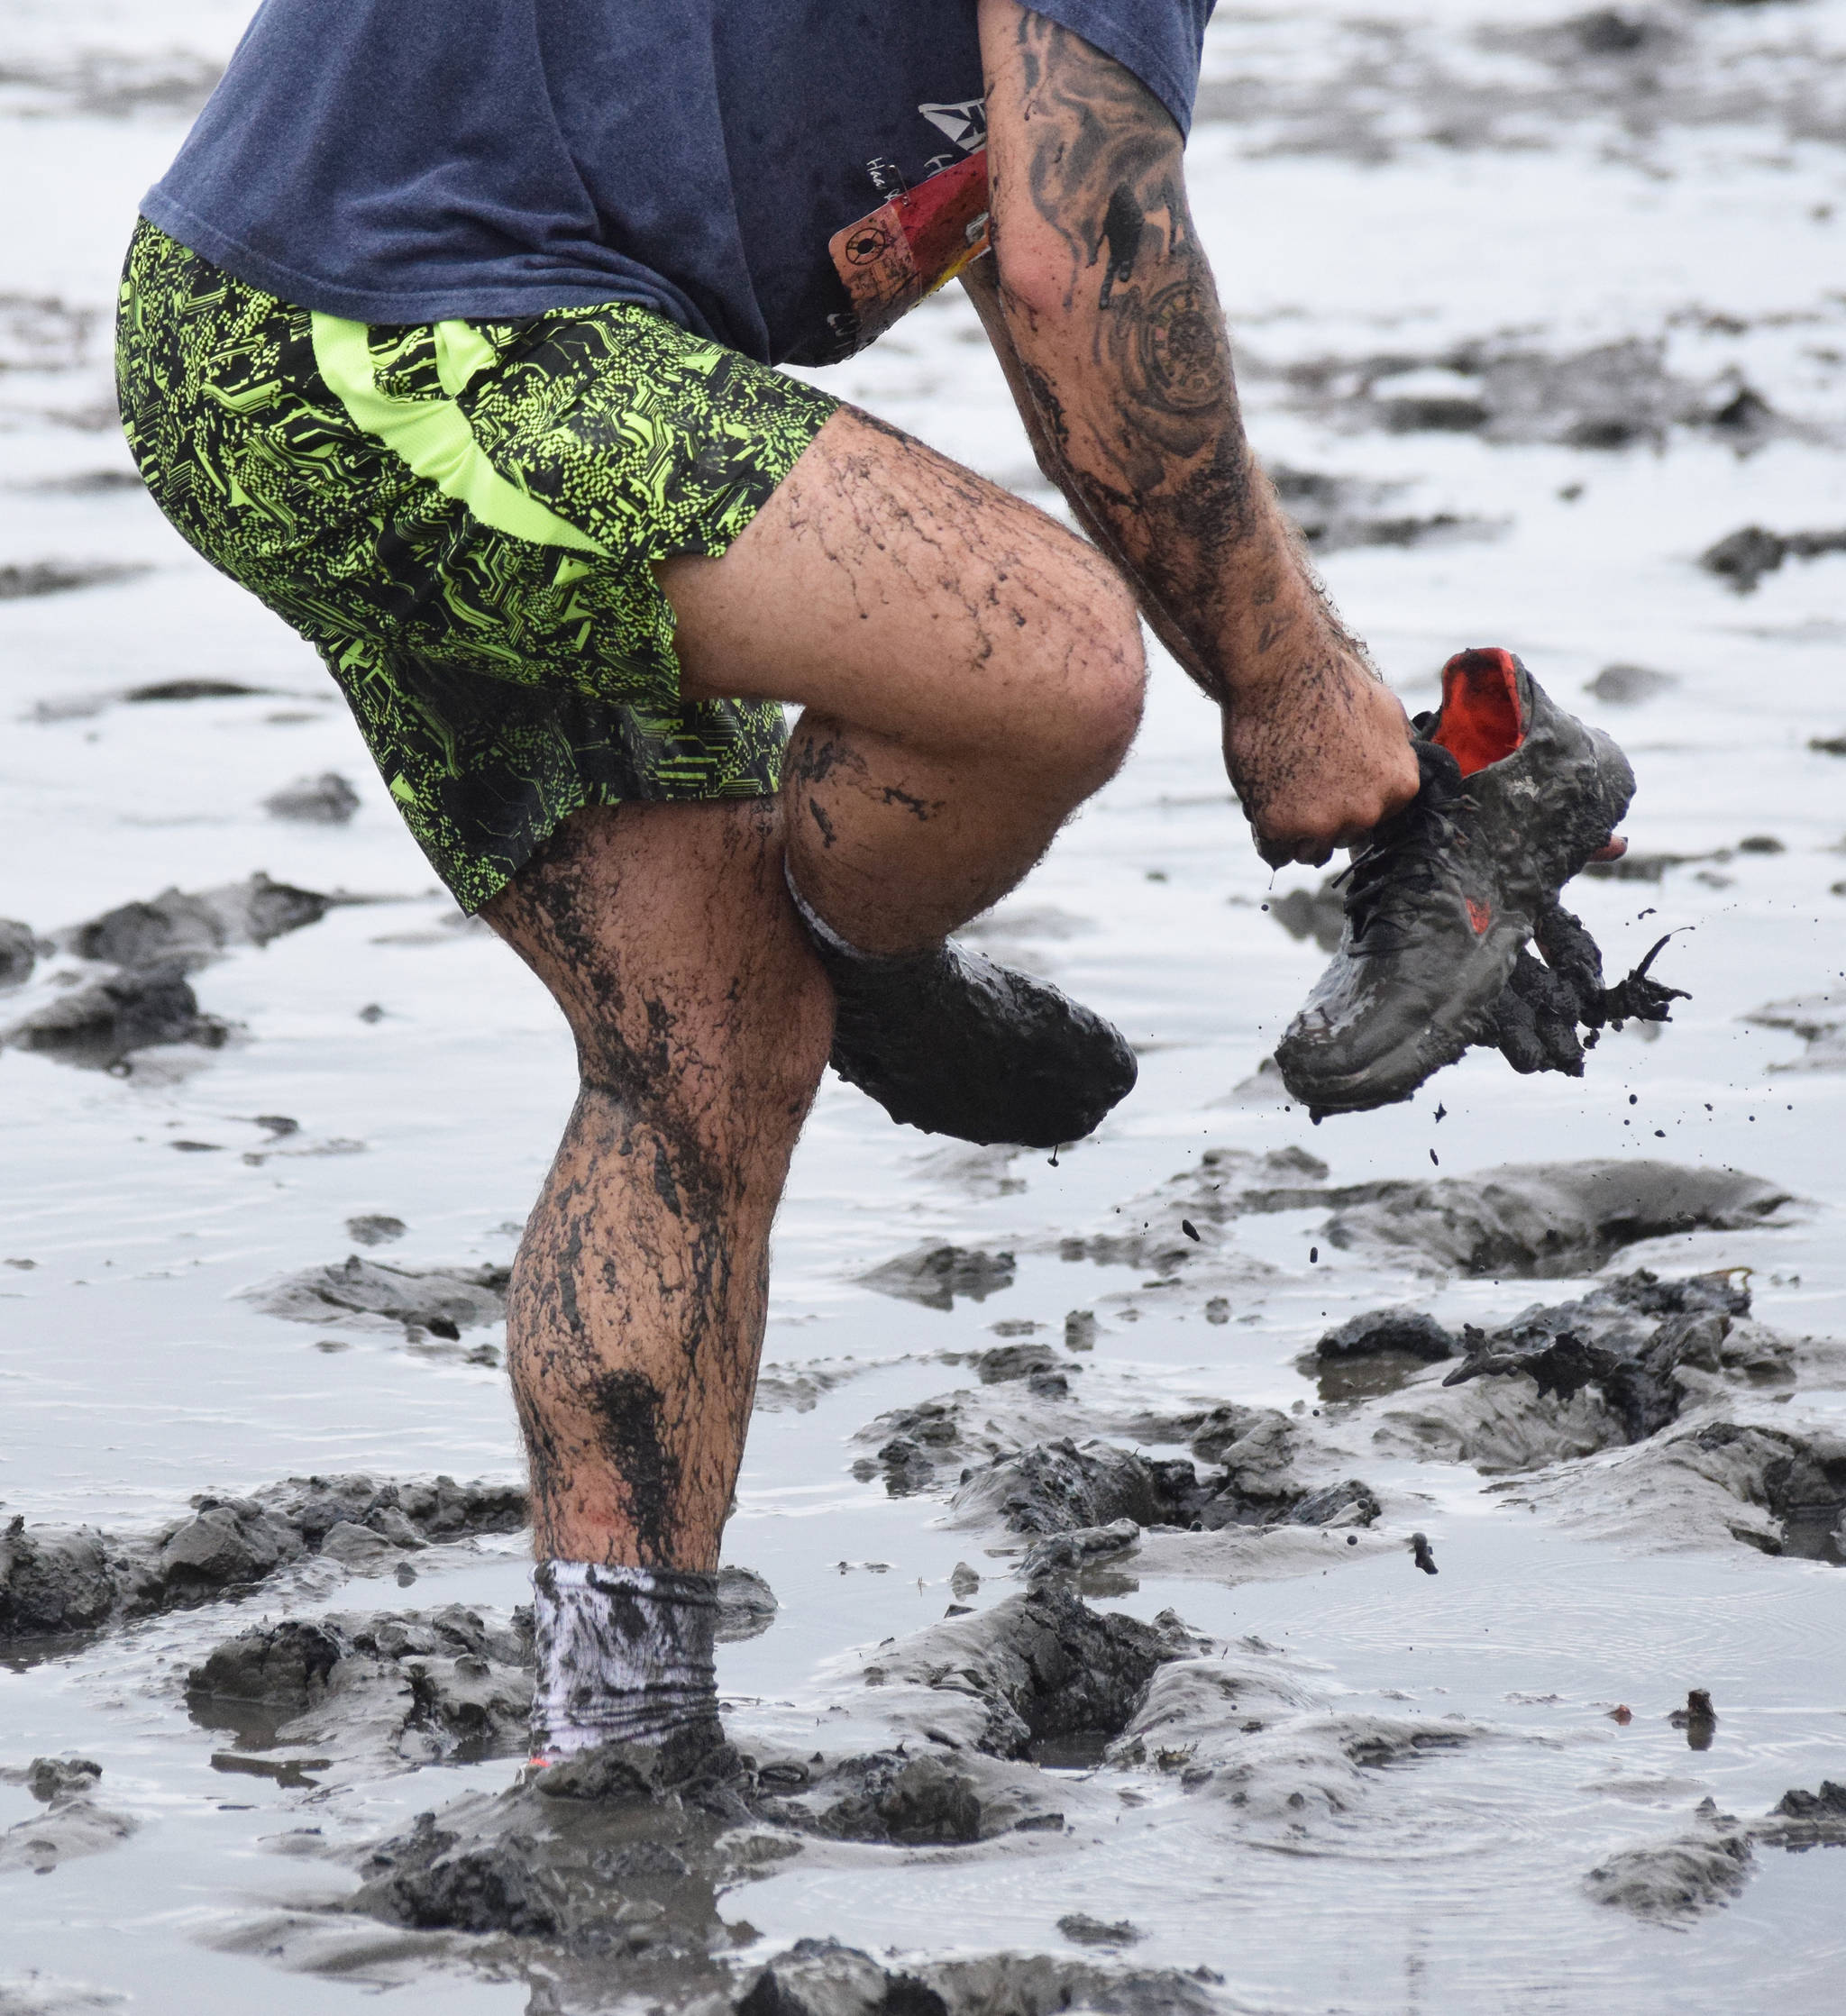 Jay Harris stops to put his shoe back on after it came off in deep mud Saturday at the Ninilchik Clam Scramble Mud and Obstacle Run in Ninilchik, Alaska. (Photo by Joey Klecka/Peninsula Clarion)